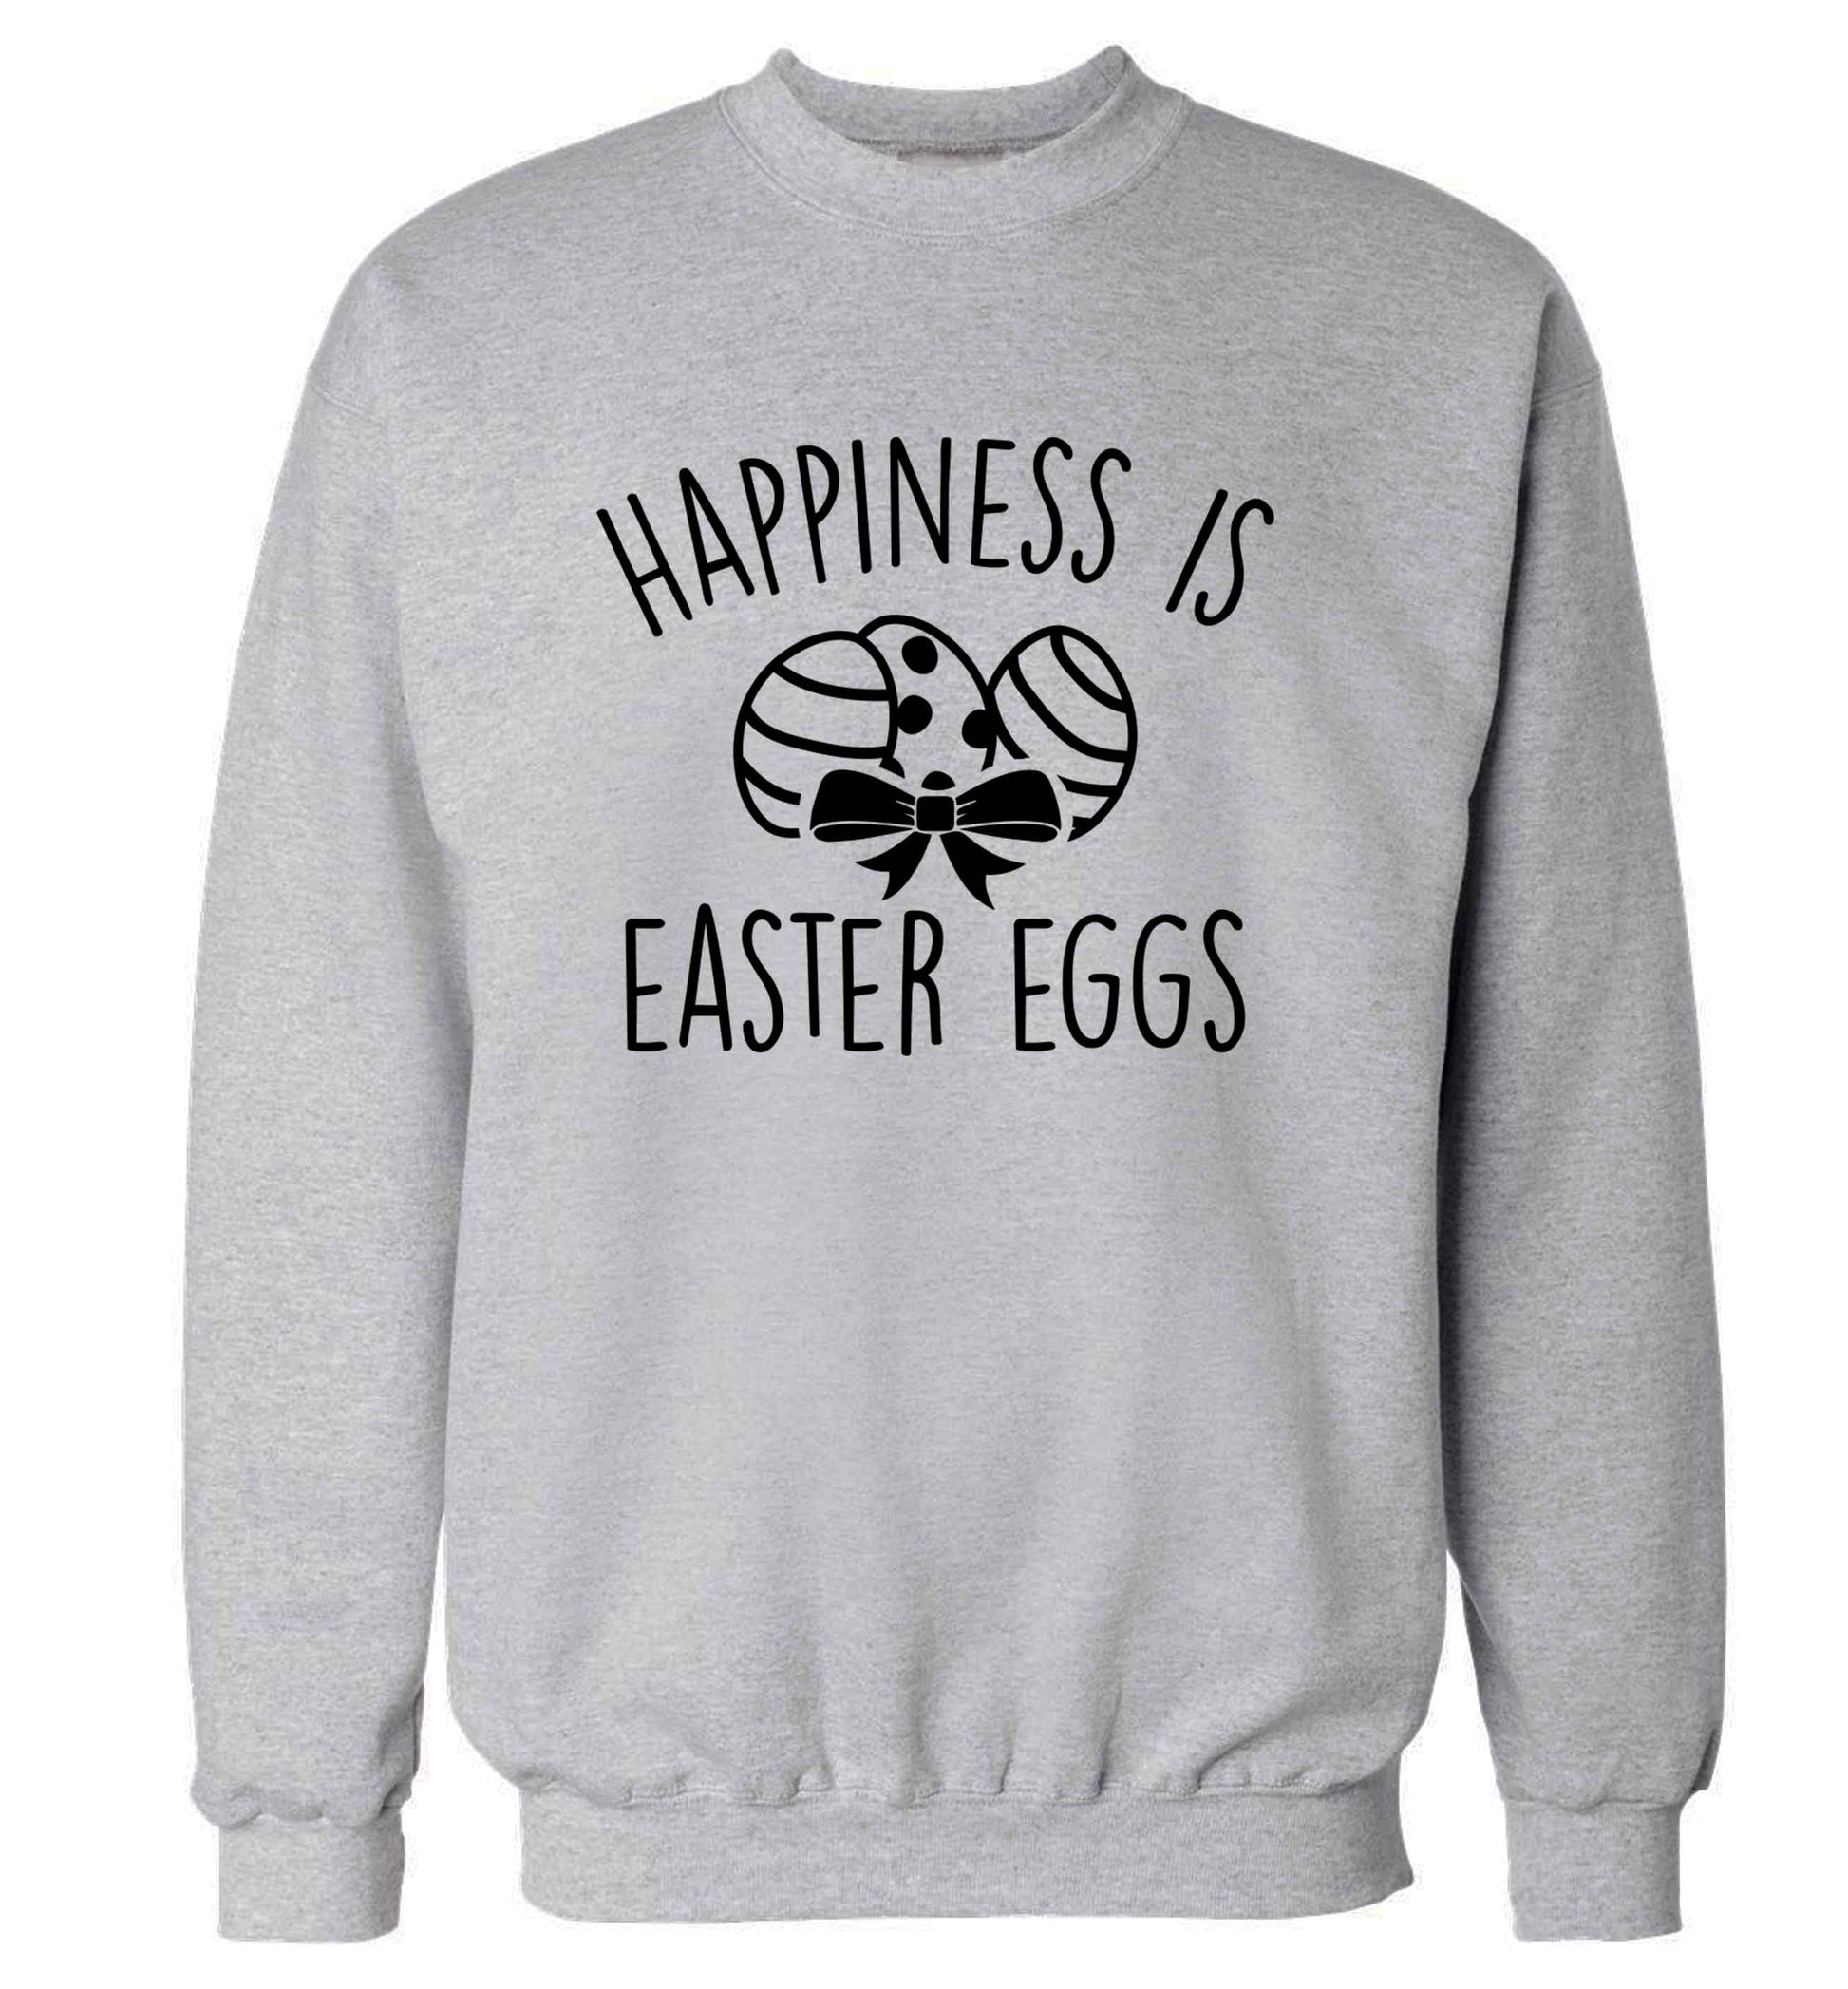 Happiness is Easter eggs adult's unisex grey sweater 2XL